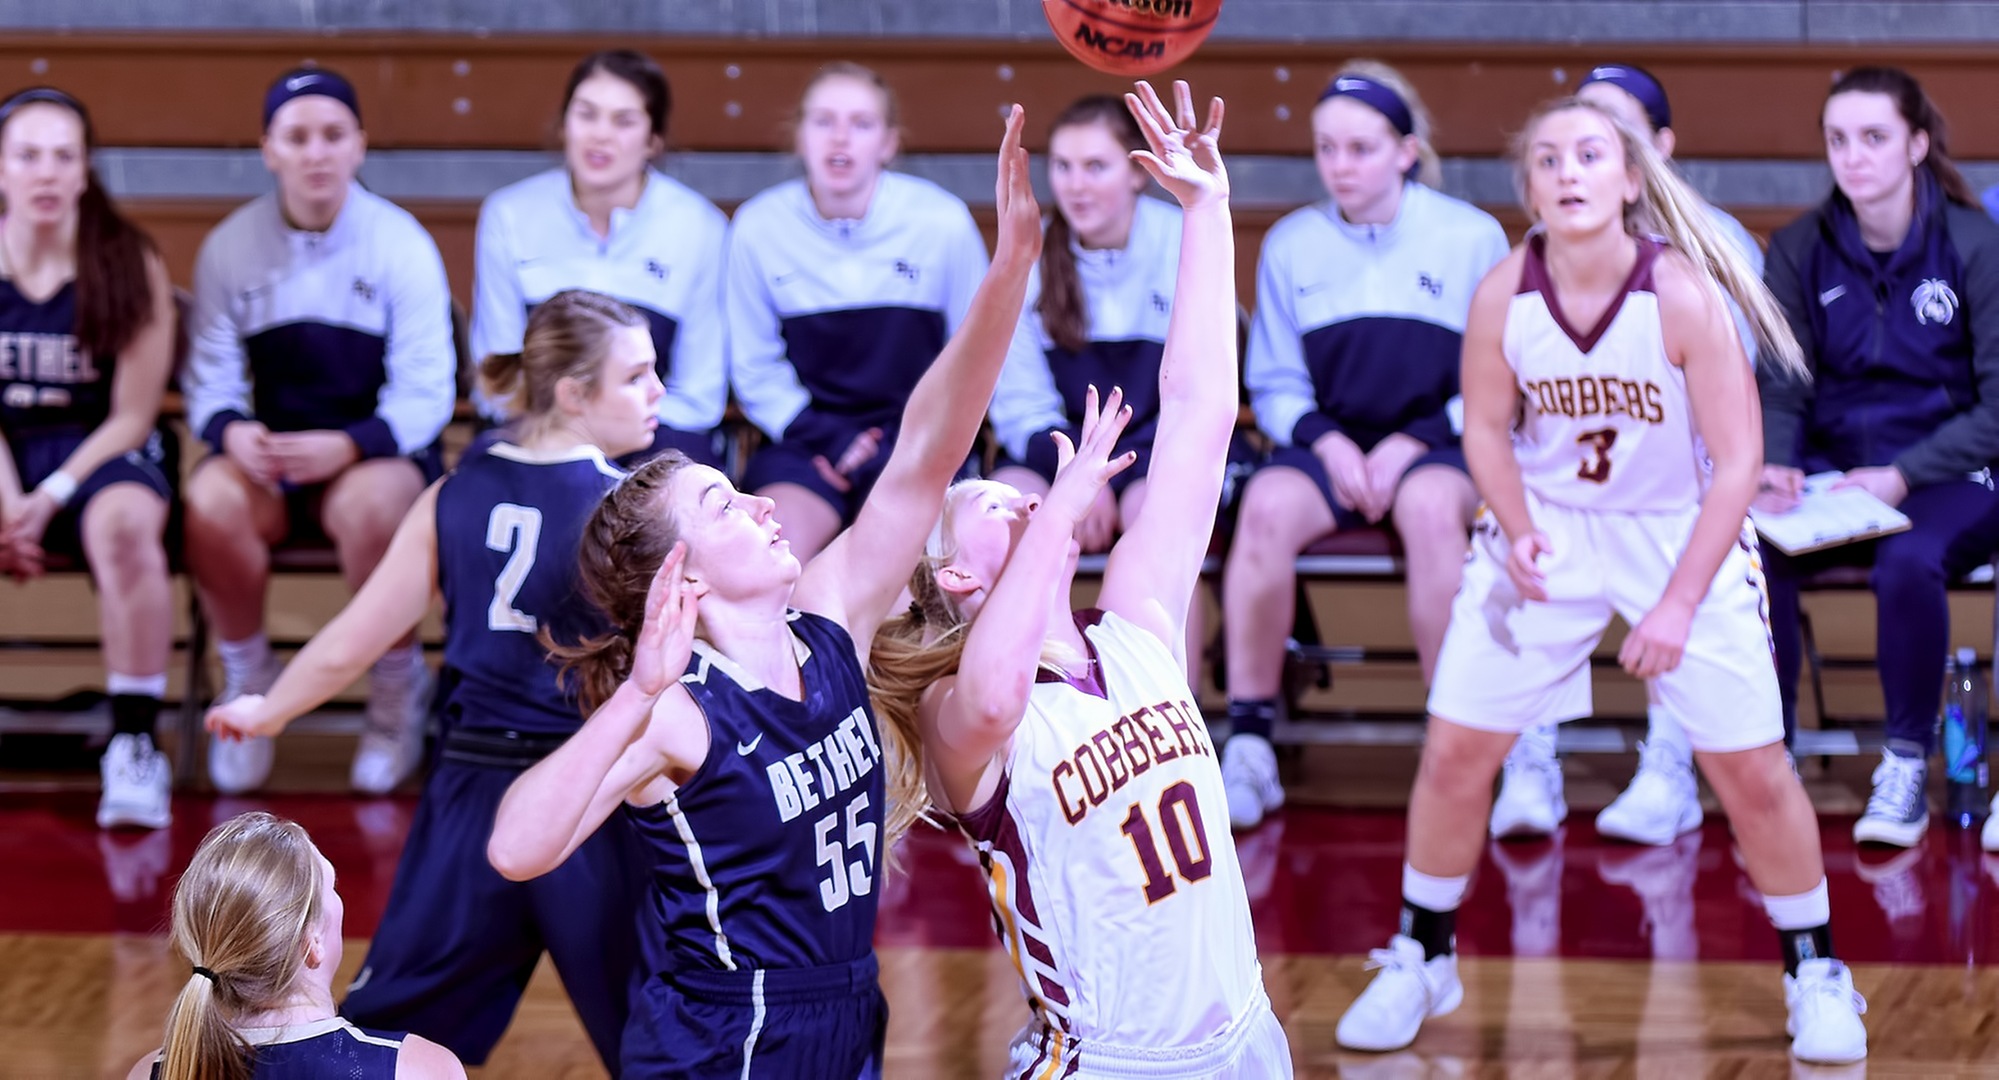 Junior Elizabeth Birkemeyer had team highs in points and rebounds in the Cobbers' game at #5 Bethel. She put up 12 points and eight rebounds.